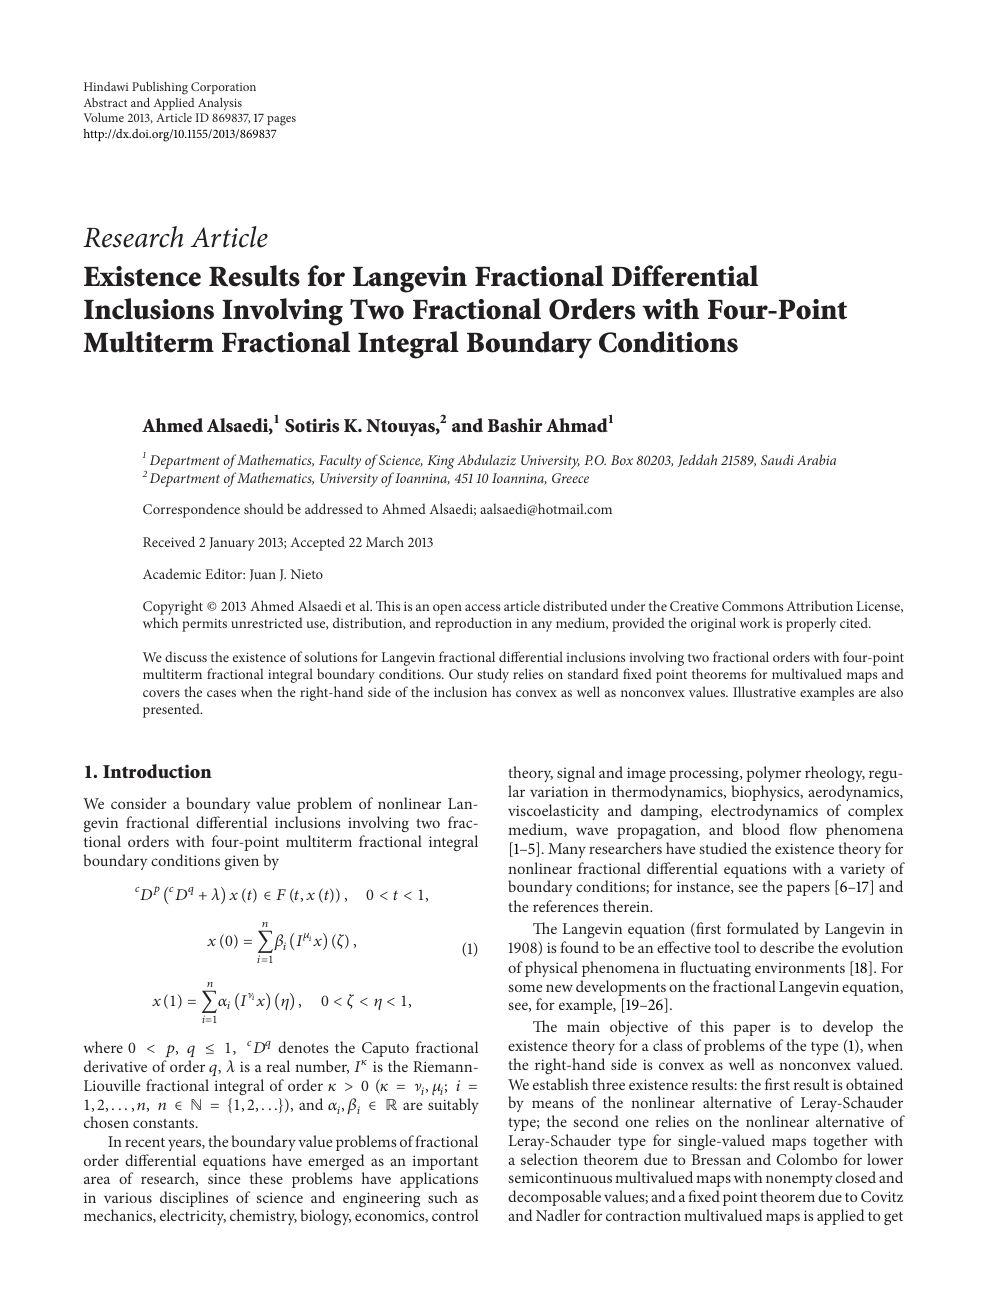 Existence Results For Langevin Fractional Differential Inclusions Involving Two Fractional Orders With Four Point Multiterm Fractional Integral Boundary Conditions Topic Of Research Paper In Mathematics Download Scholarly Article Pdf And Read For